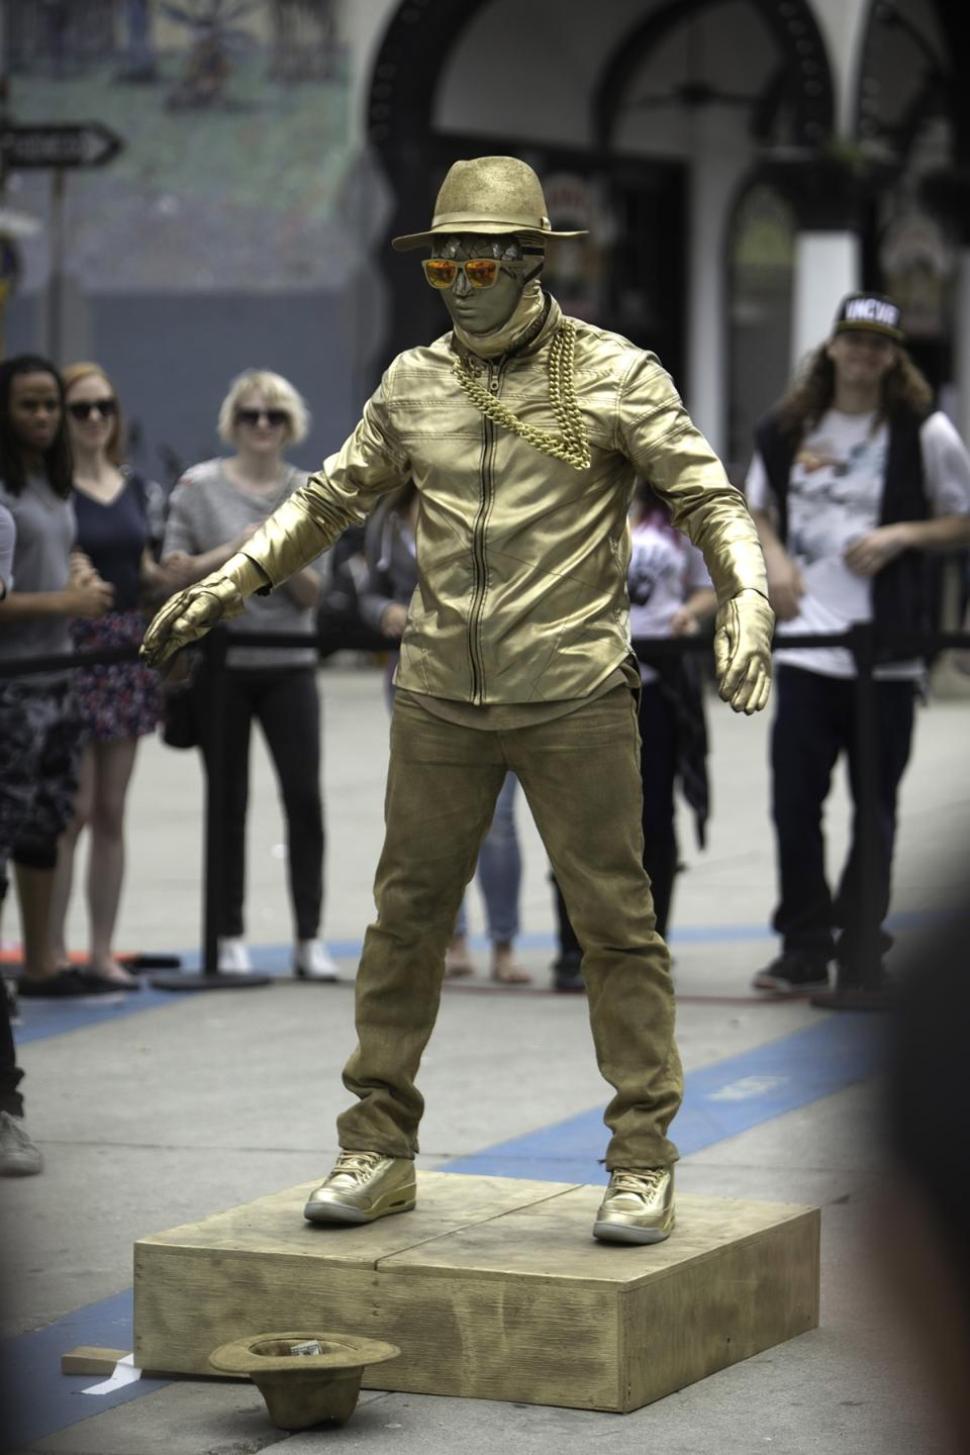 Usher suited up in gold to surprise fans with dance moves in Venice, Calif.